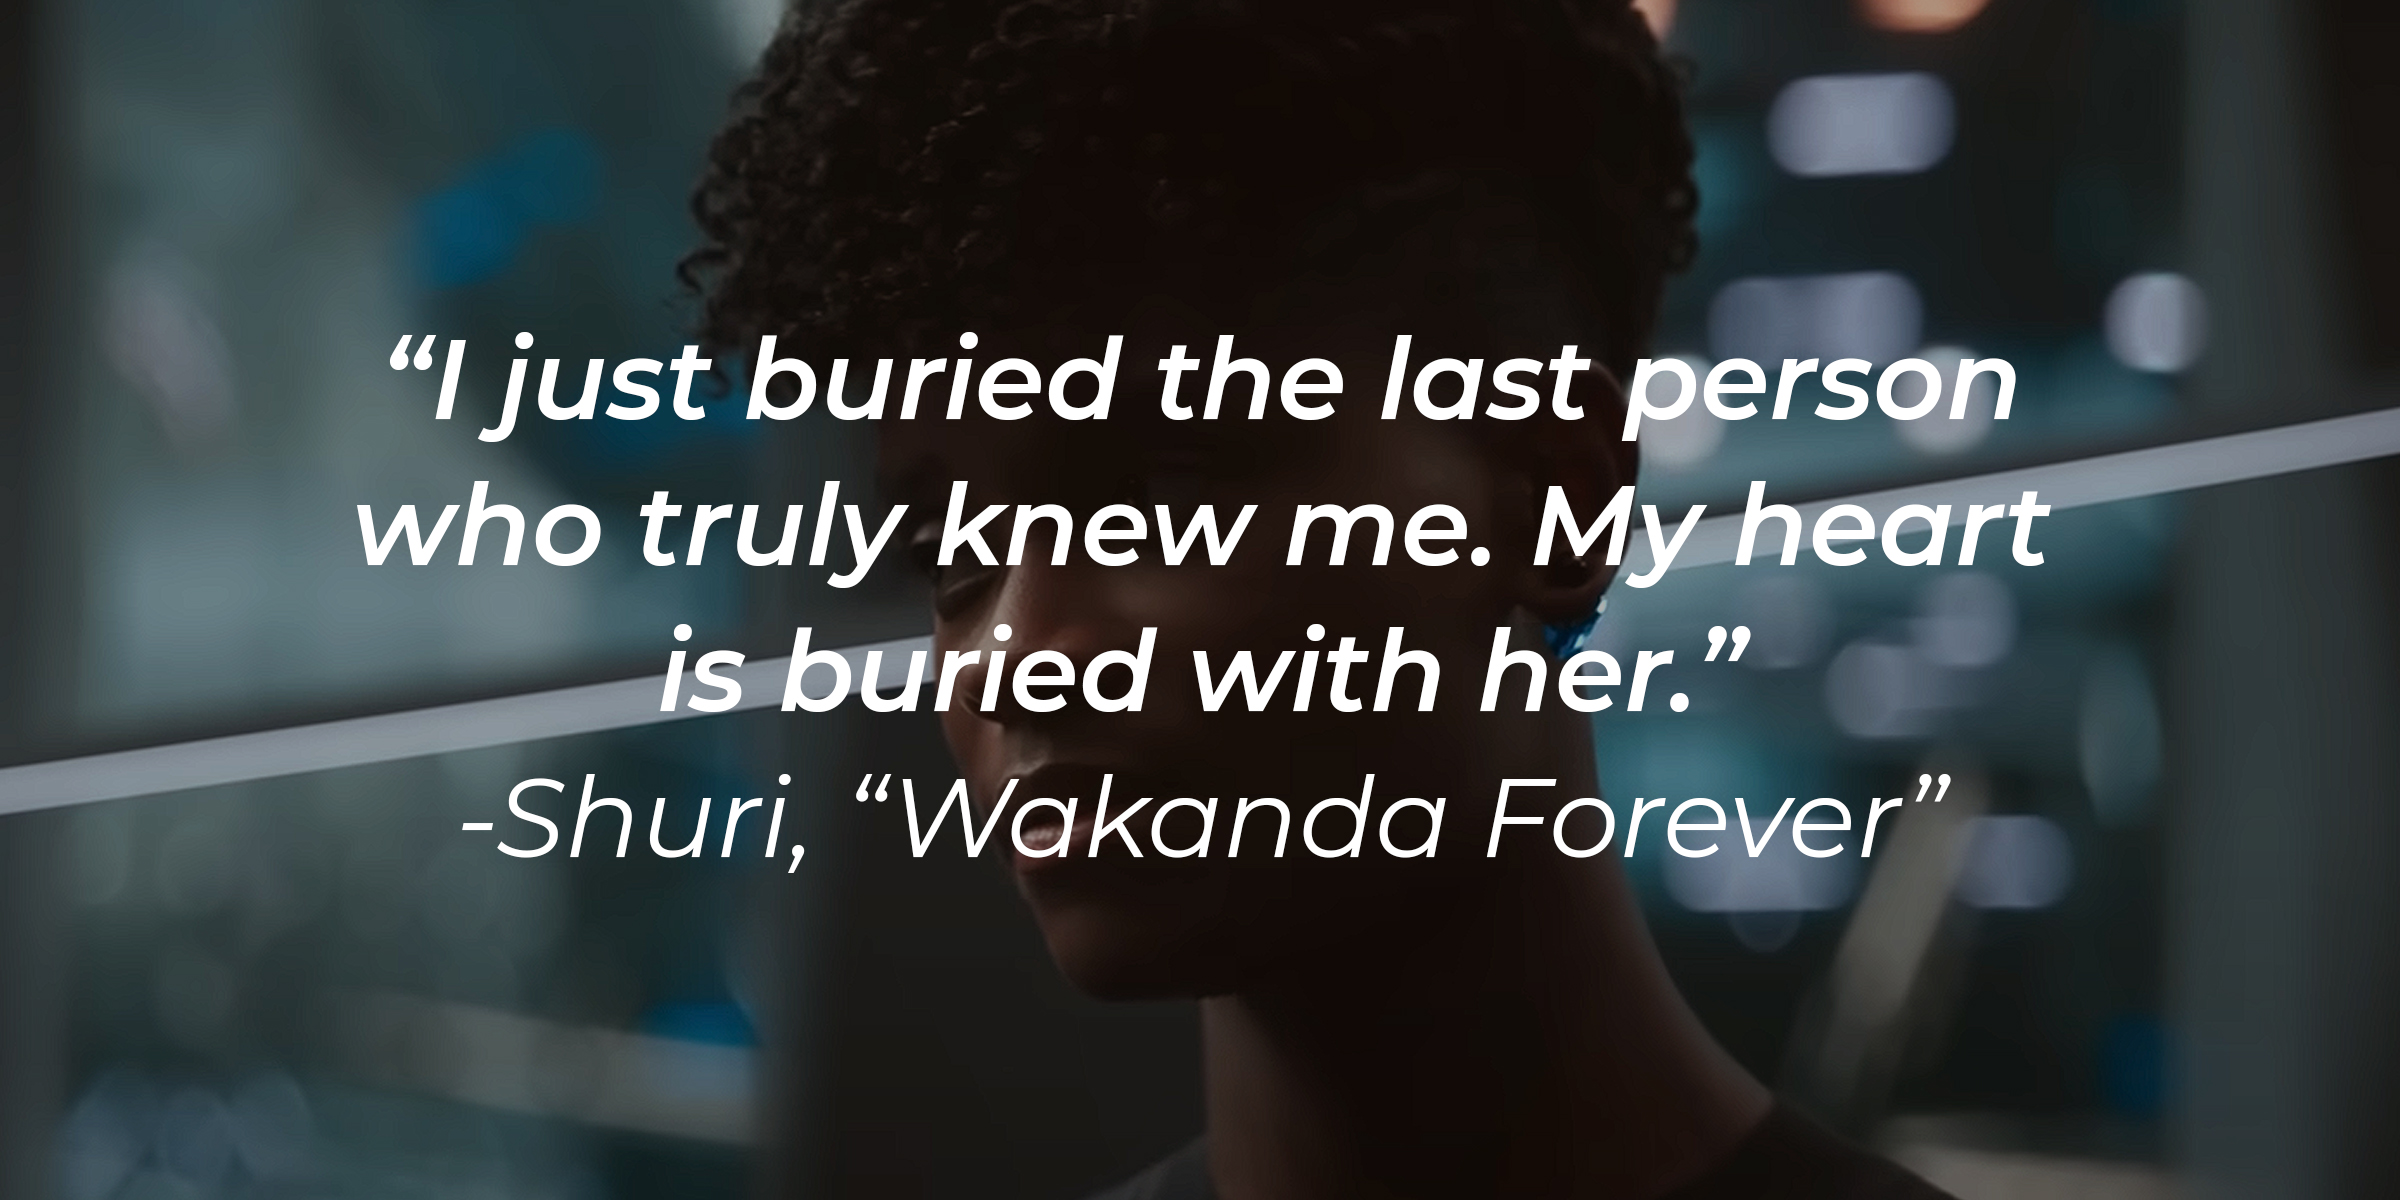 Image of Shuri with her quote from "Wakanda Forever," "I just buried the last person who truly knew me. My heart is buried with her." | Source: Youtube.com/marvel